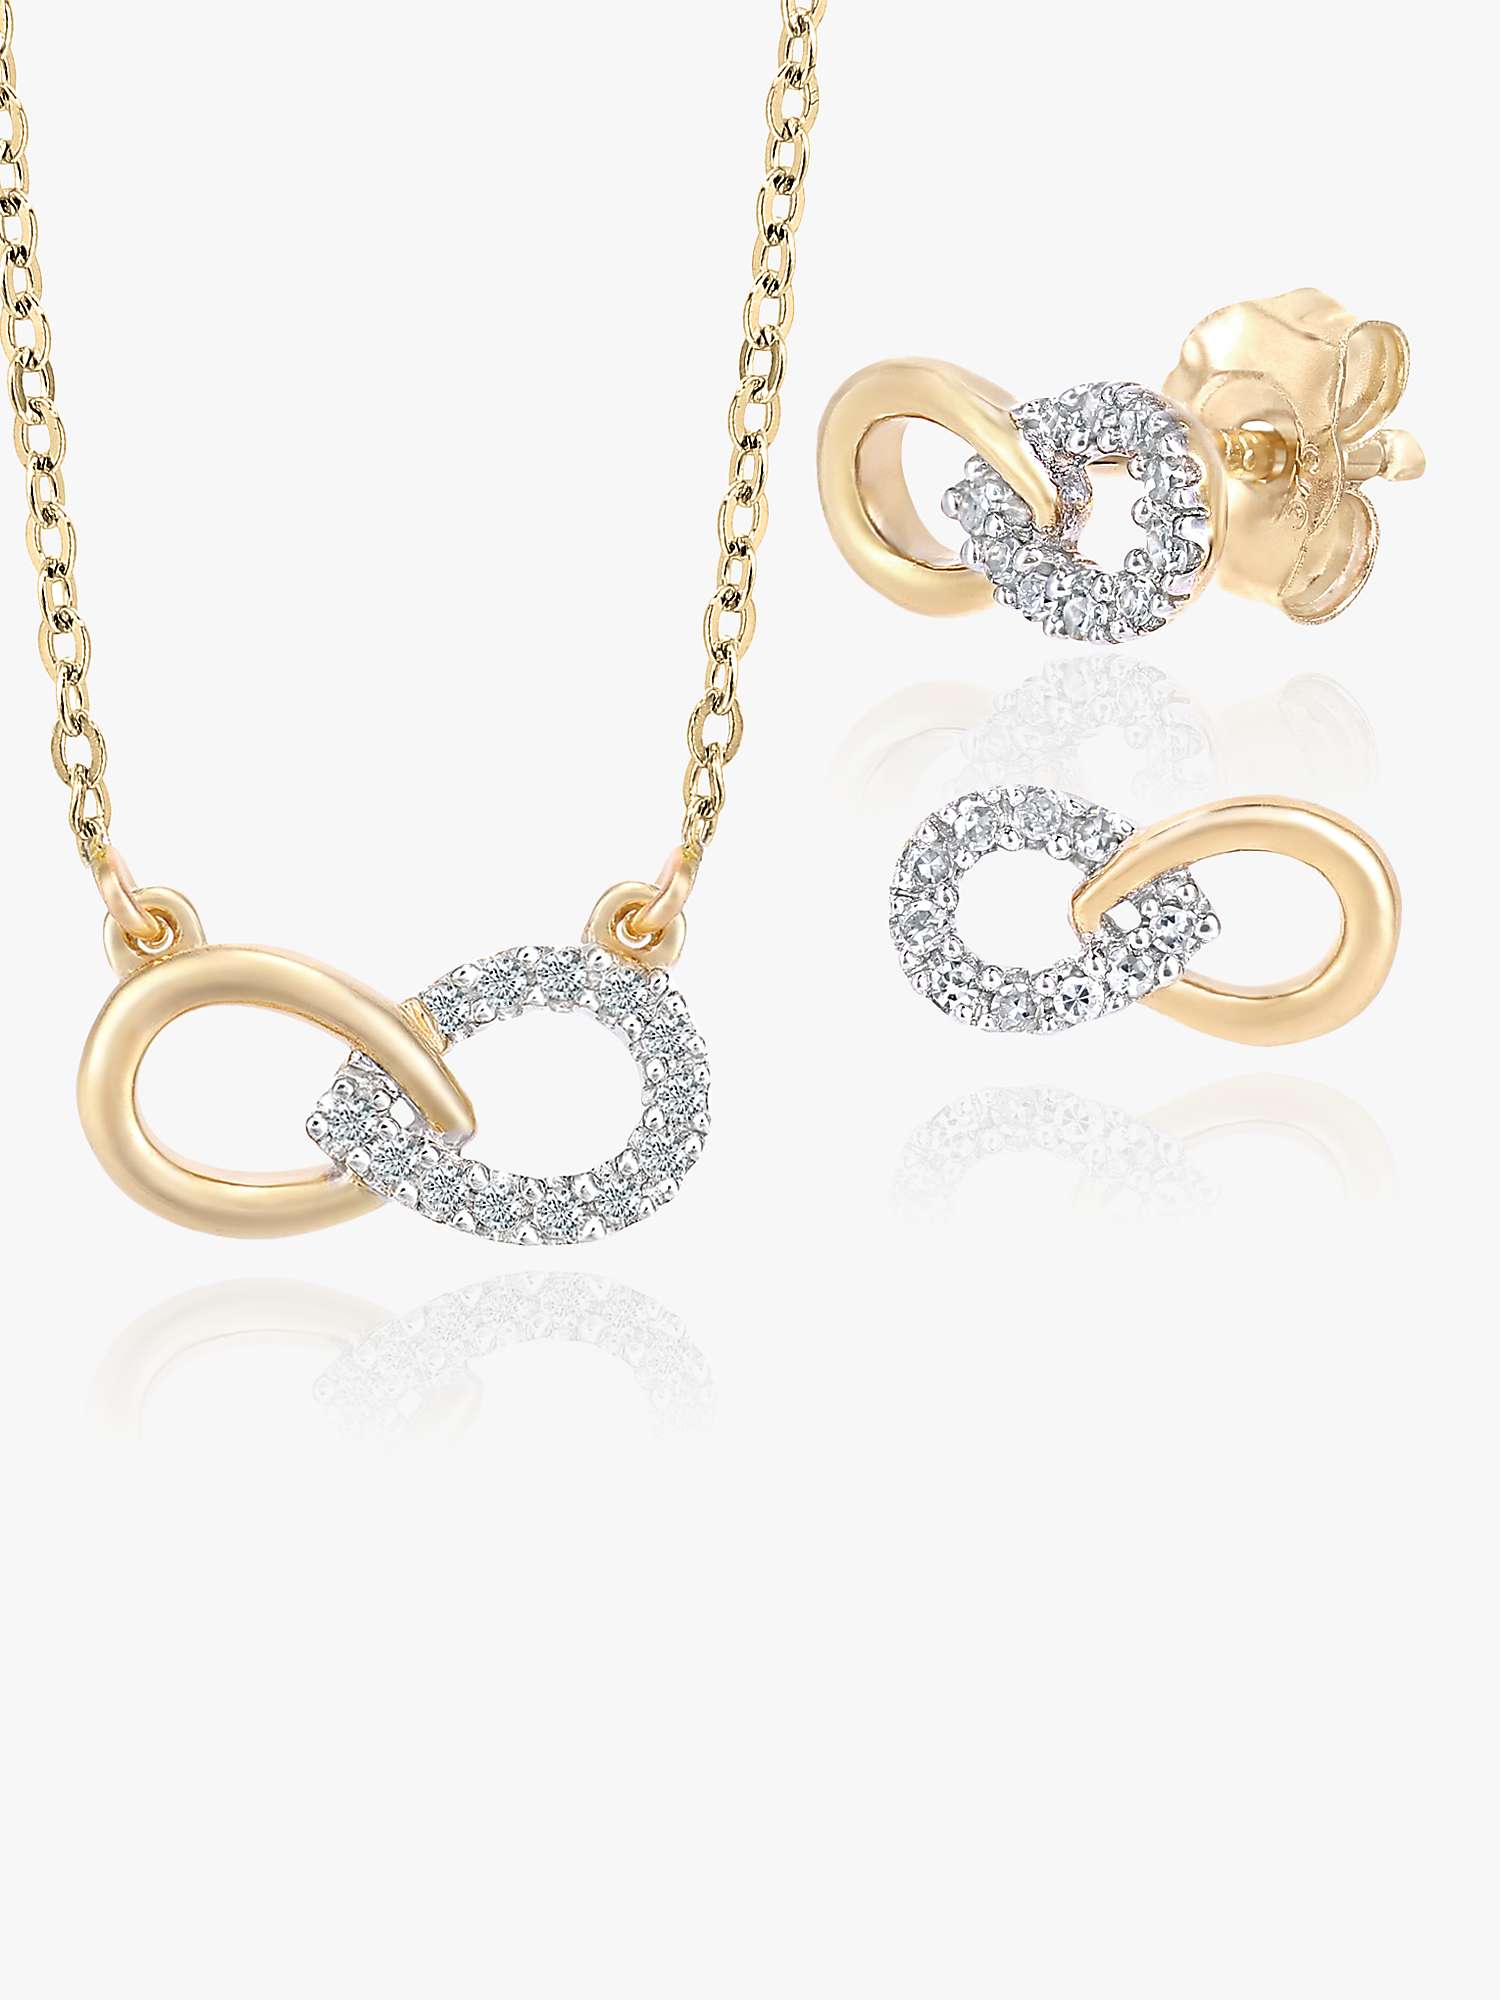 Buy Mogul 9ct Yellow Gold Diamond Infinity Necklace and Earrings Jewellery Set, Gold Online at johnlewis.com